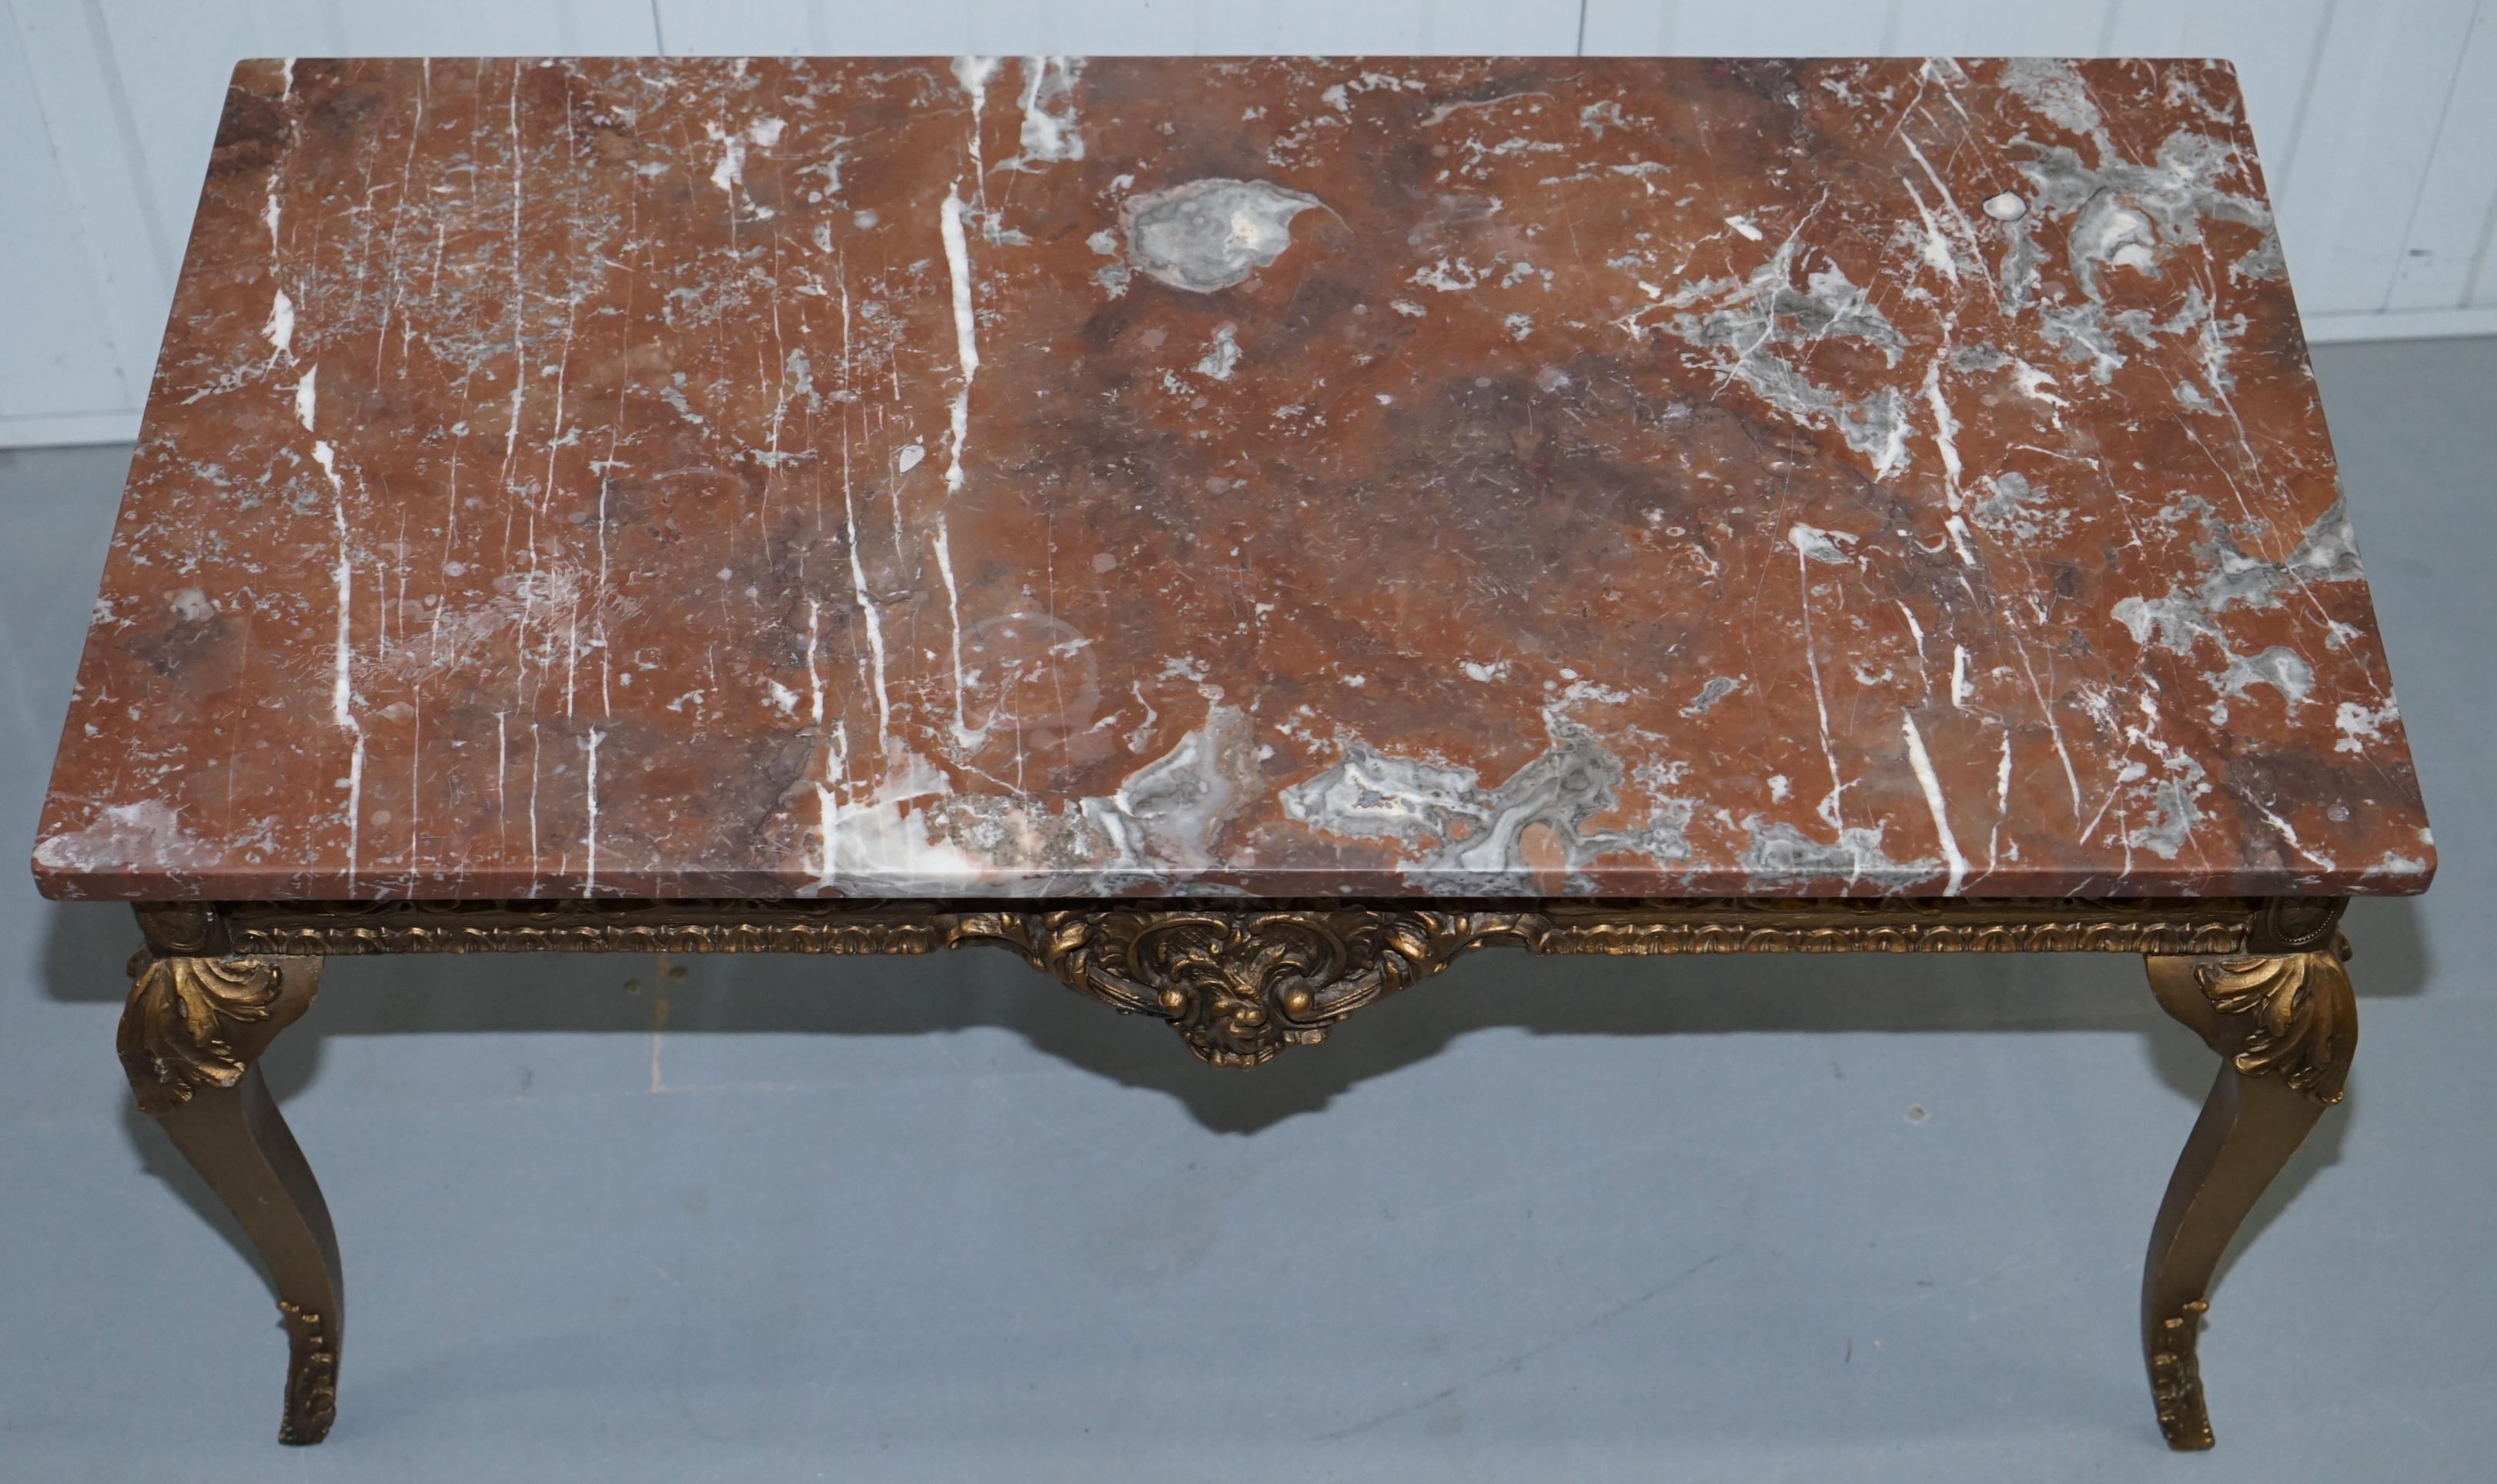 20th Century Rouge Marble Topped French Giltwood Coffee Table Heavy Rococo Baroque Carving